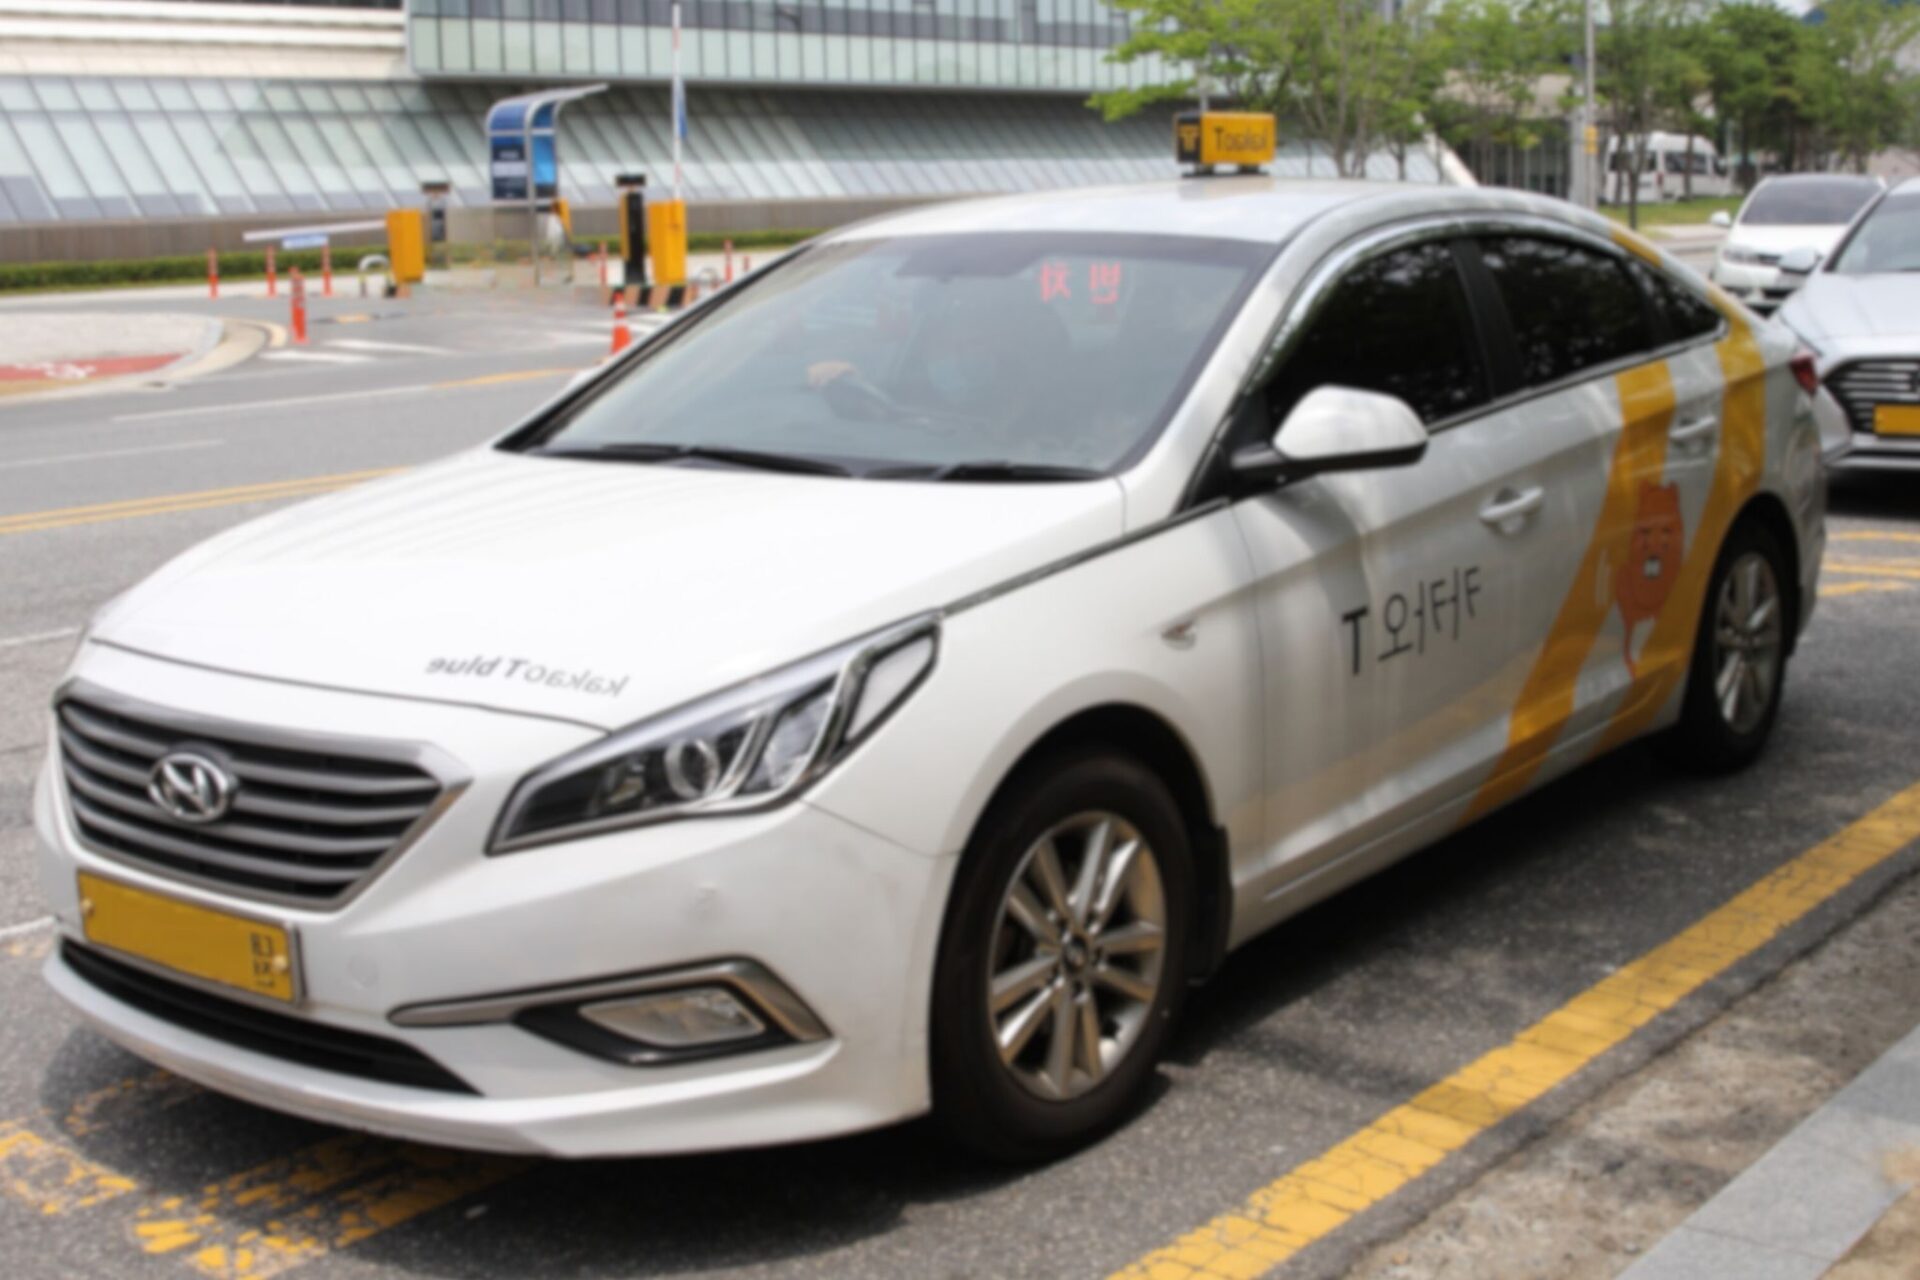 Taxis in South Korea: Everything you need to know